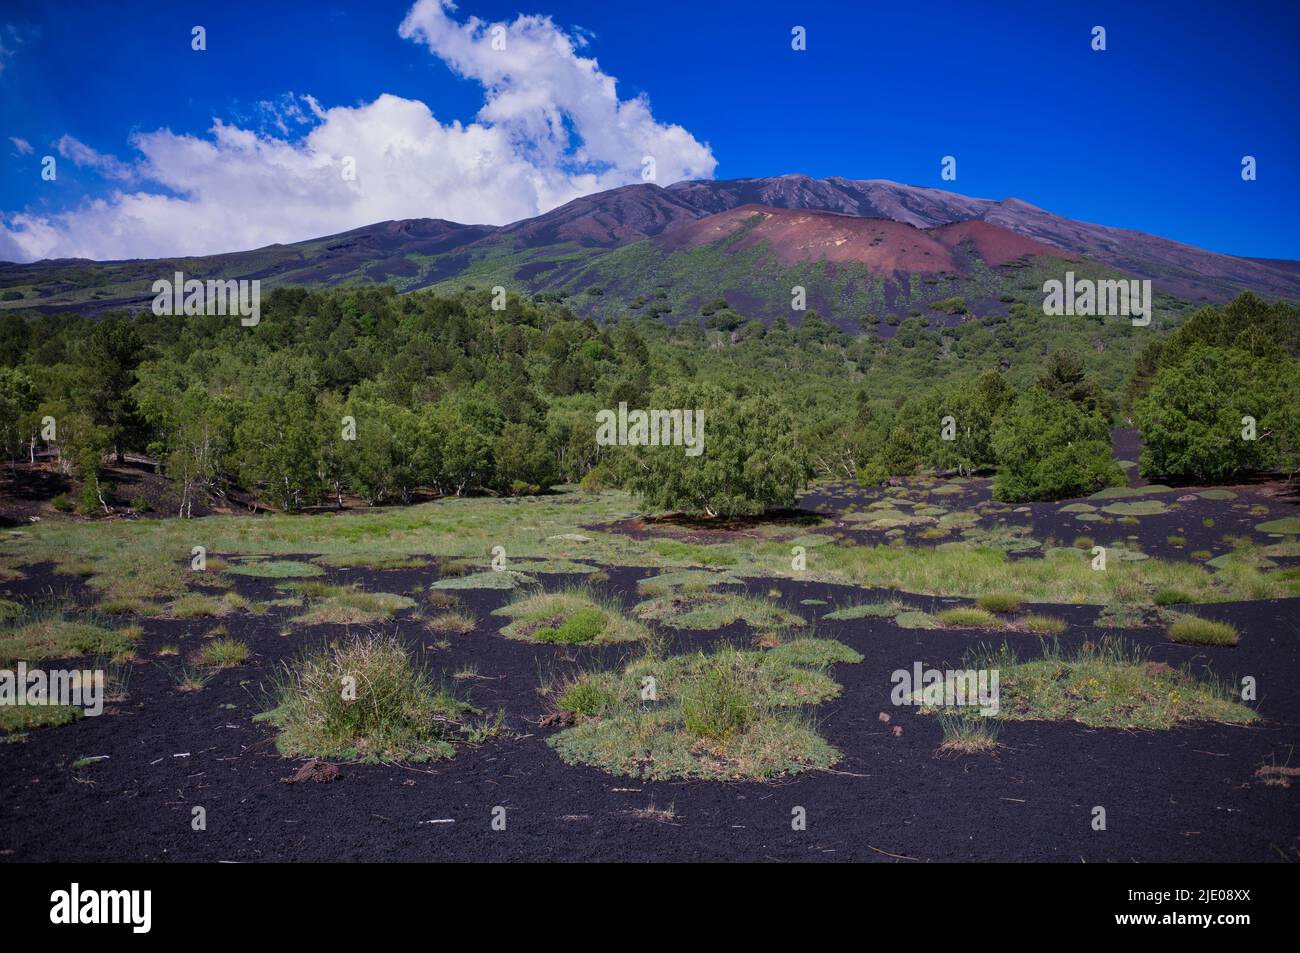 , Astragalus siculus,, a plant endemic to Sicily, circular trail around Monti Sartorius, Etna volcano with eruption cloud, Sicily, Italy Stock Photo